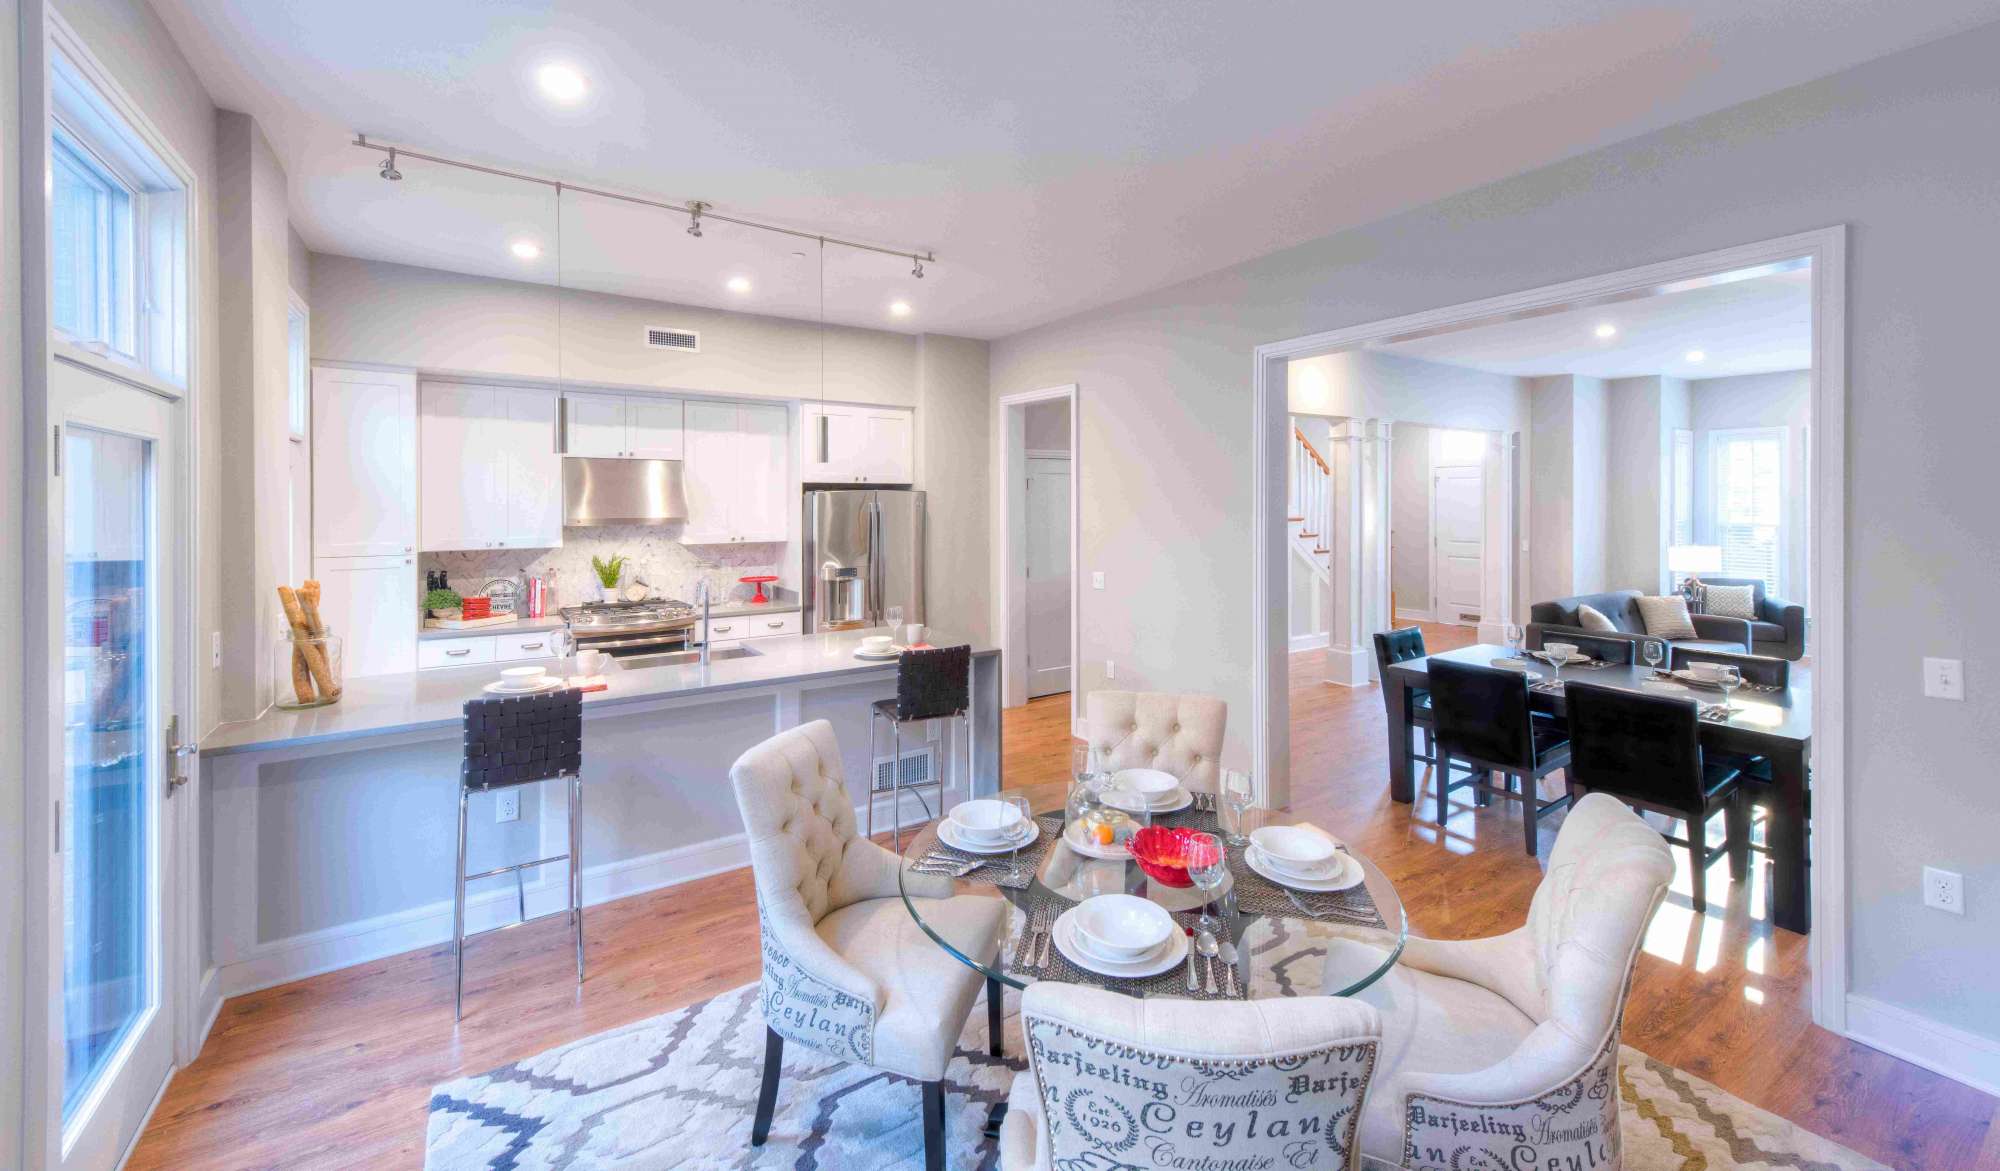 Cathedral Commons : KitchenTownhome